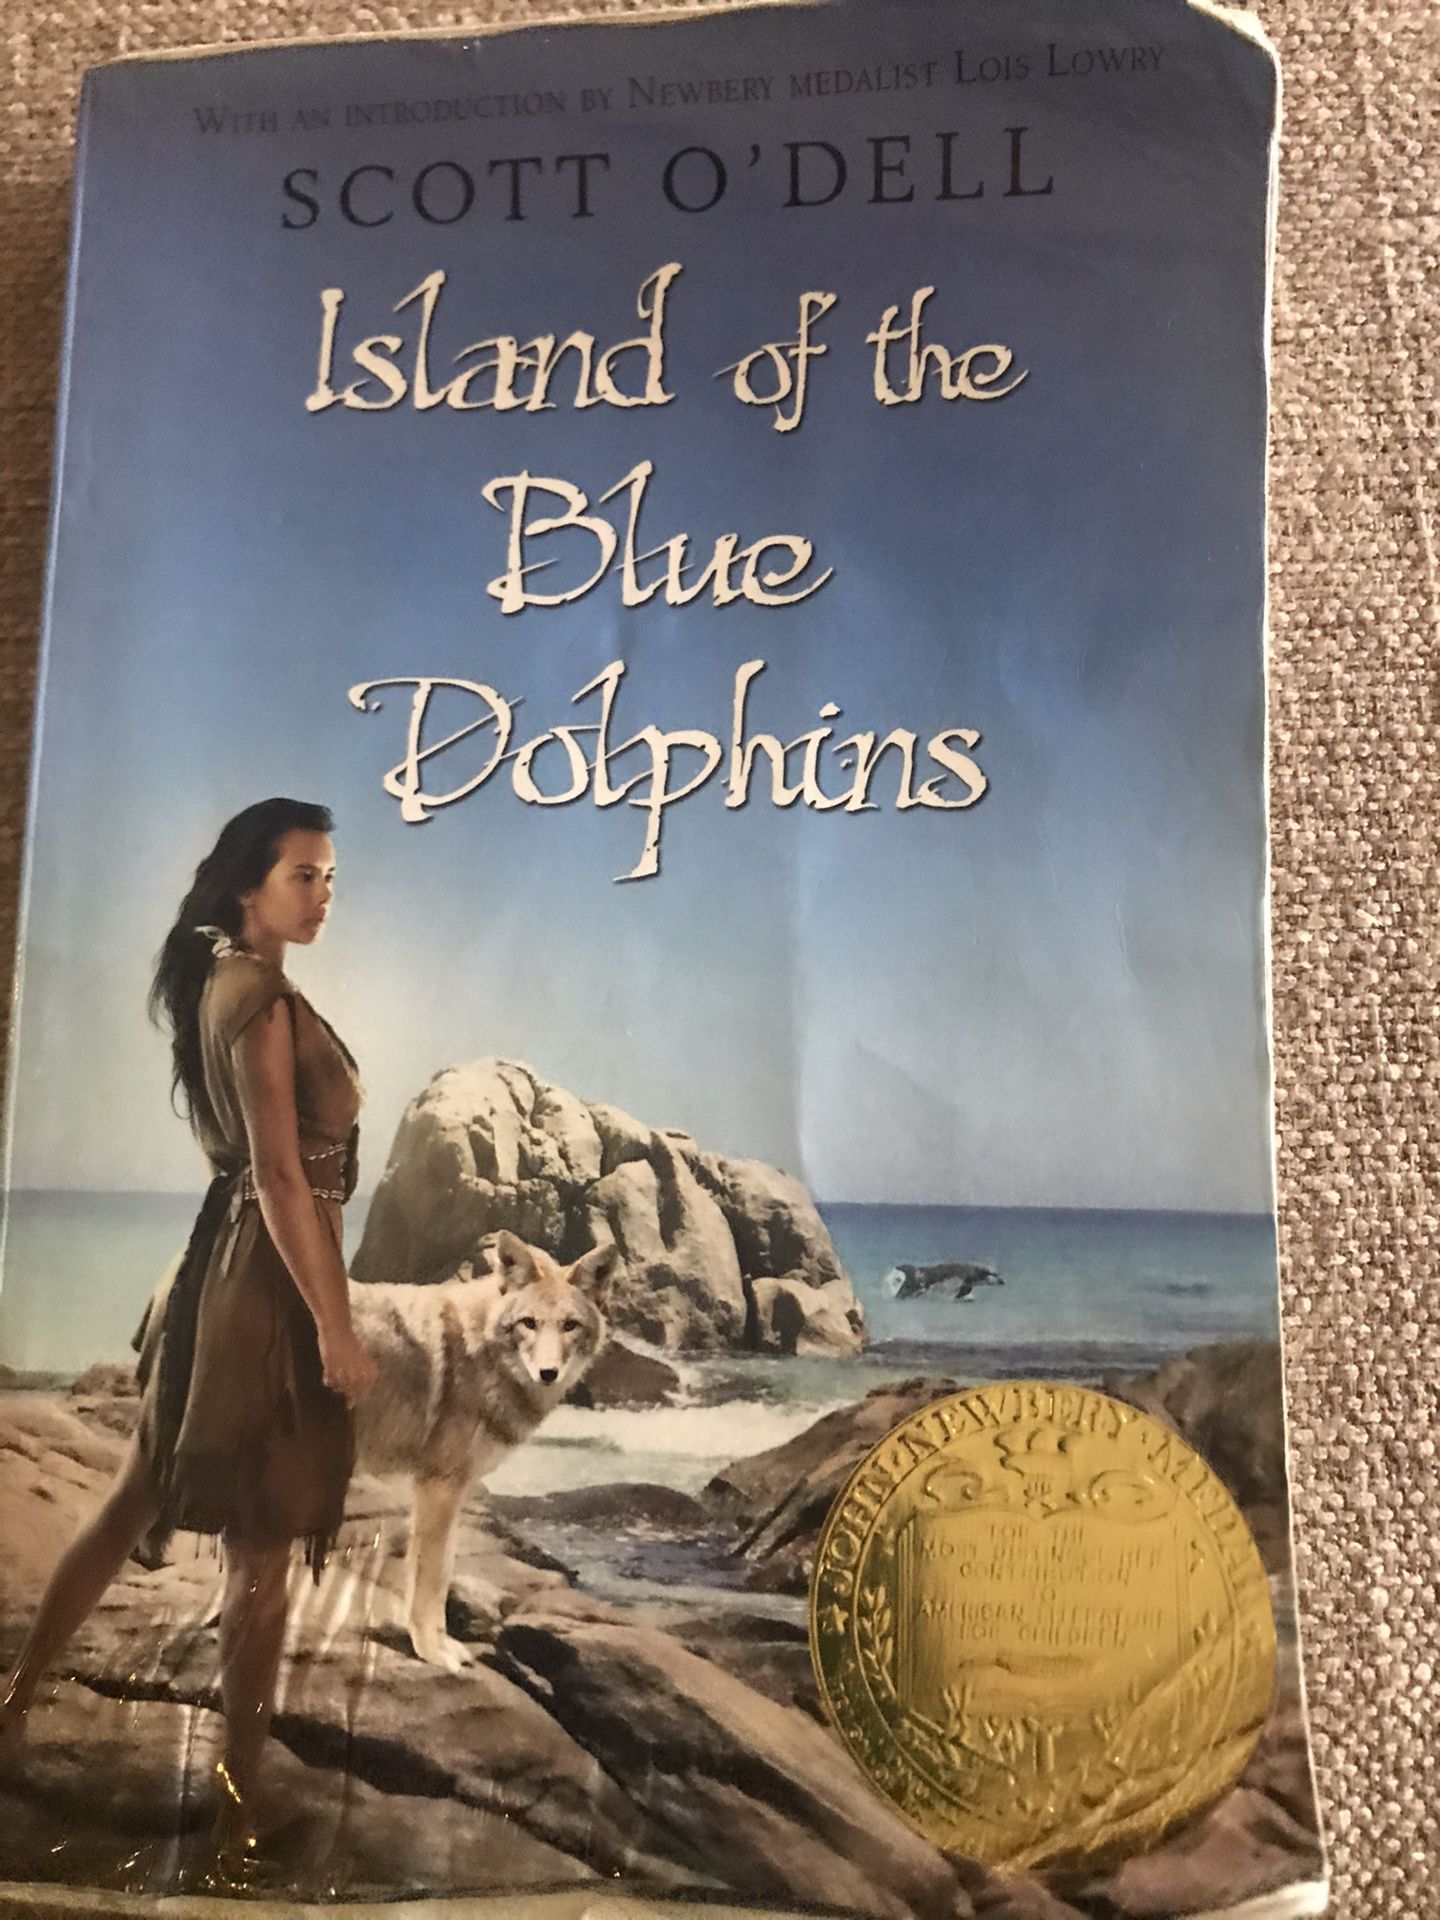 Book: Island of the Blue Dolphins by Scott O’Dell, paperback